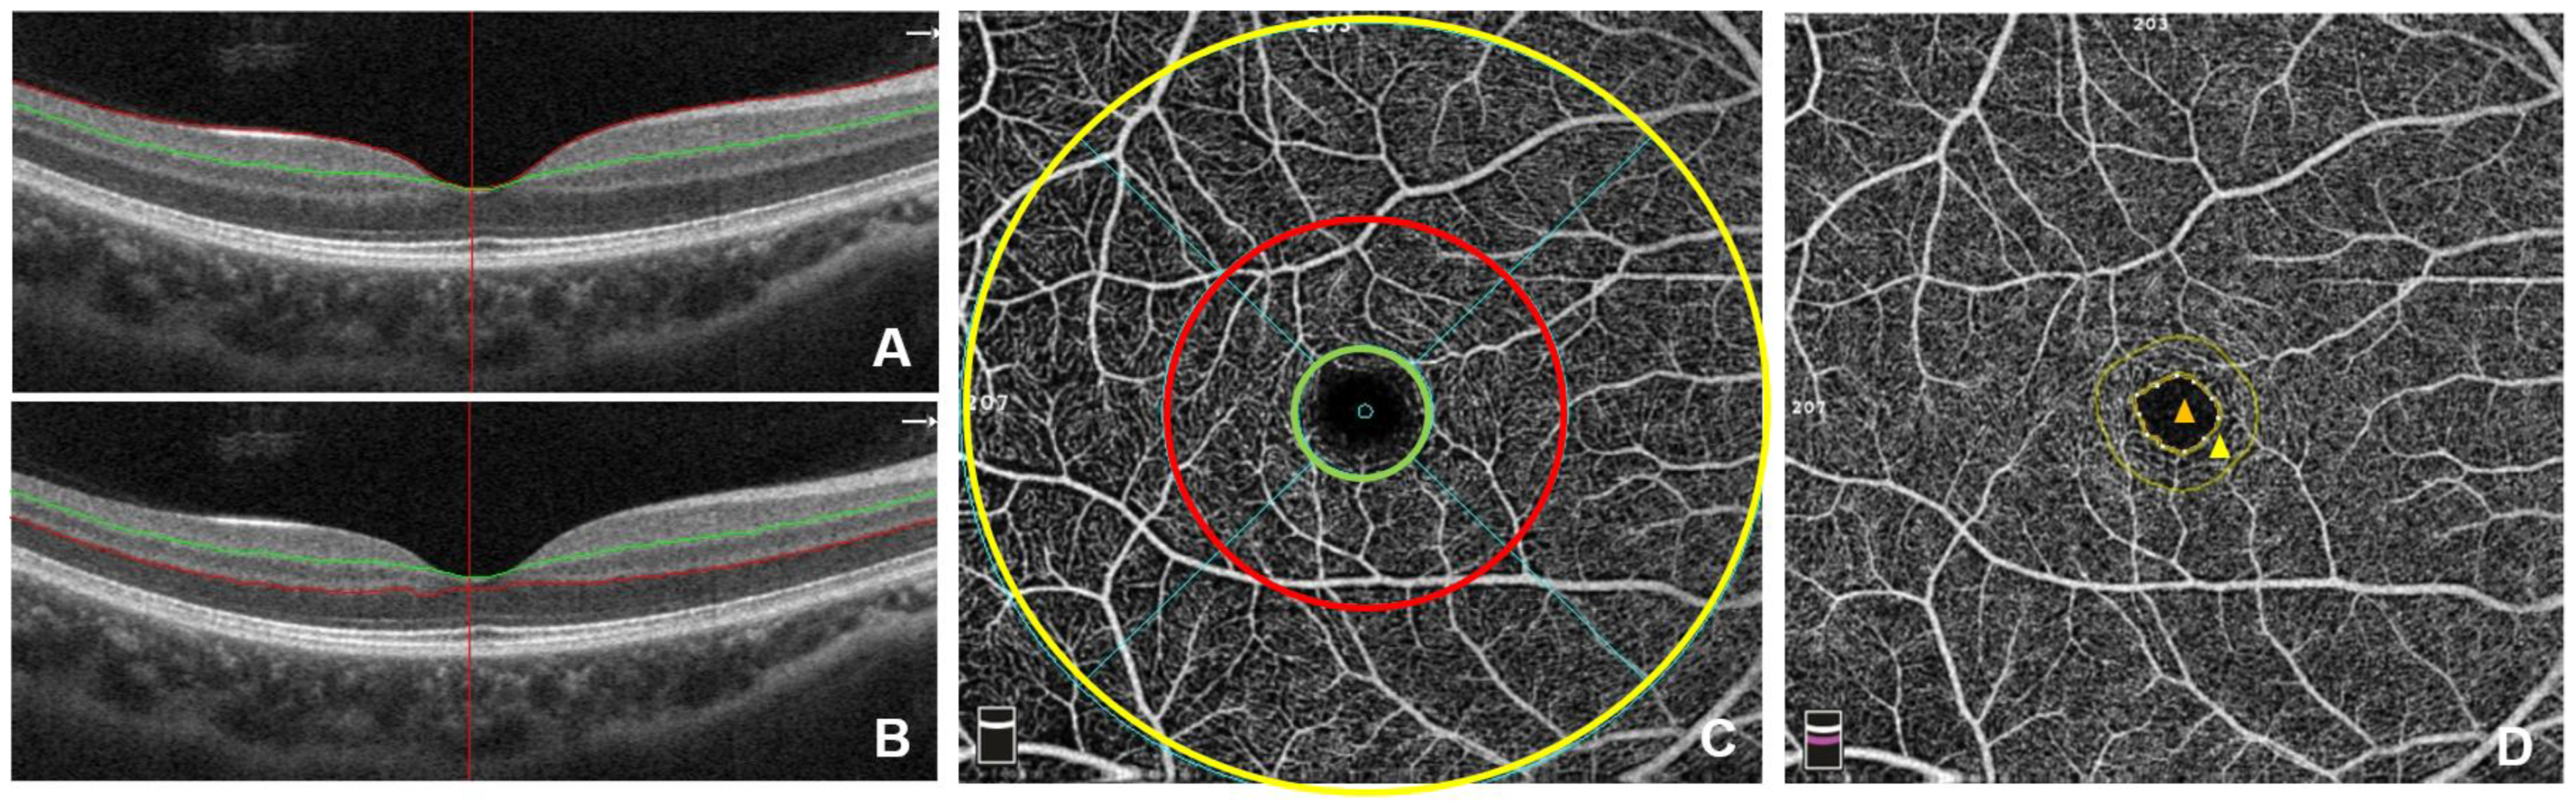 Altered ocular microvasculature in patients with systemic sclerosis and  very early disease of systemic sclerosis using optical coherence tomography  angiography